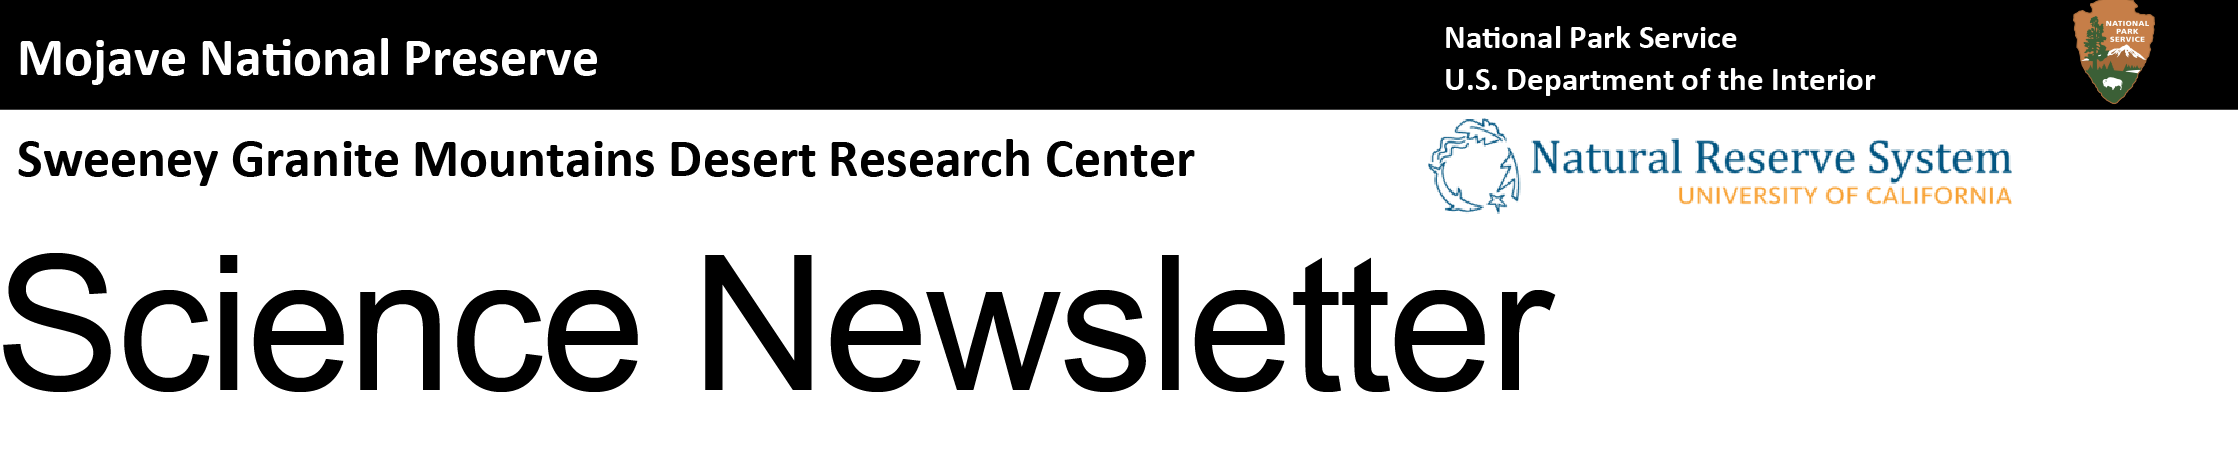 Text: Mojave National Preserve, Sweeny Granite Mountains Research Center Science Newsletter